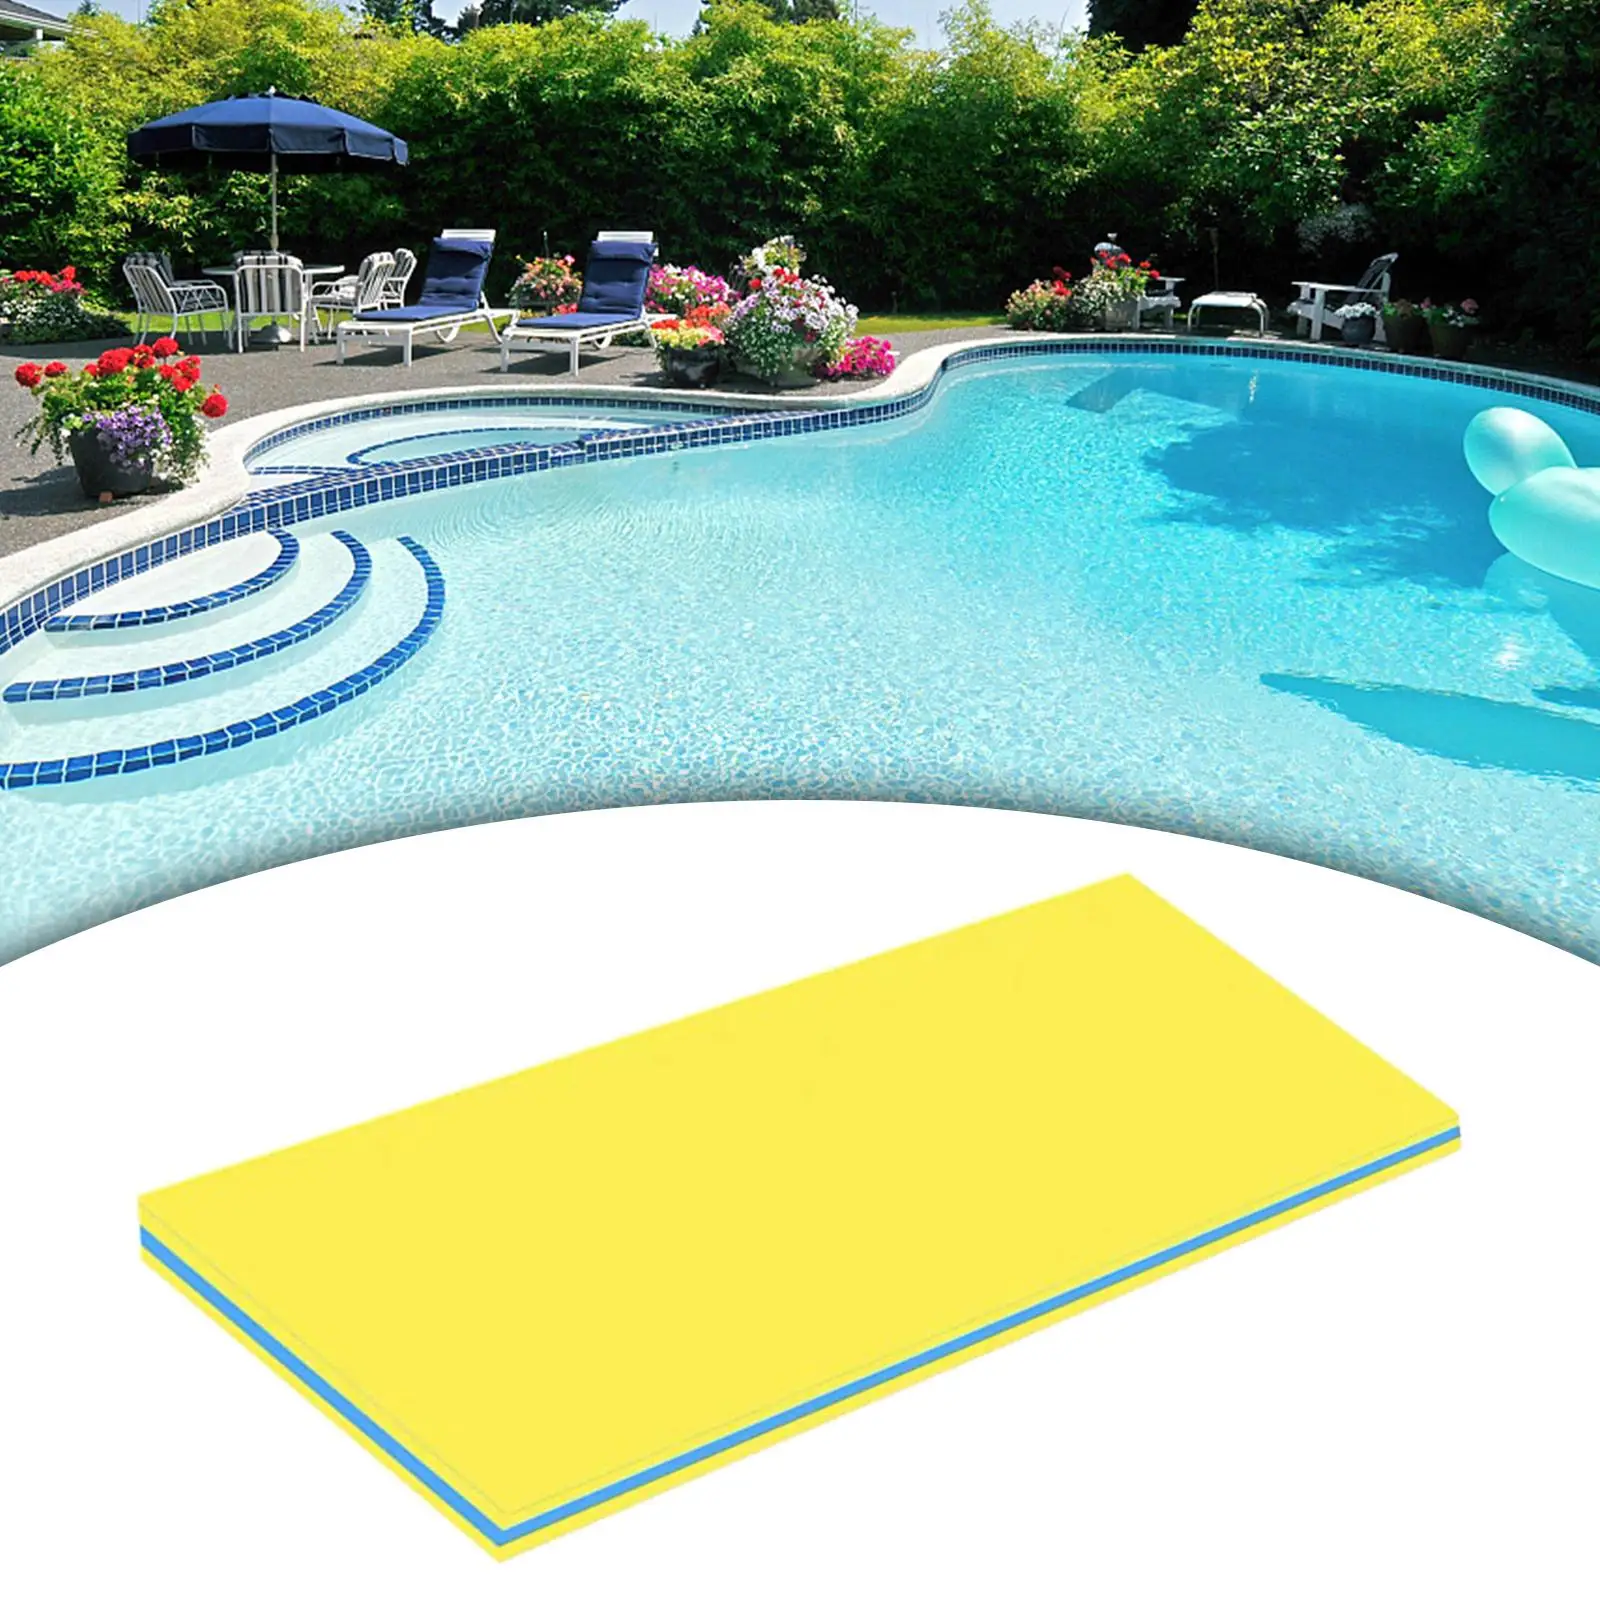 Water Floating Mat Roll up Mattress Blanket Pool Float Raft Water Recreation Lounge Mattress for Outdoor Adults Boat Beach River